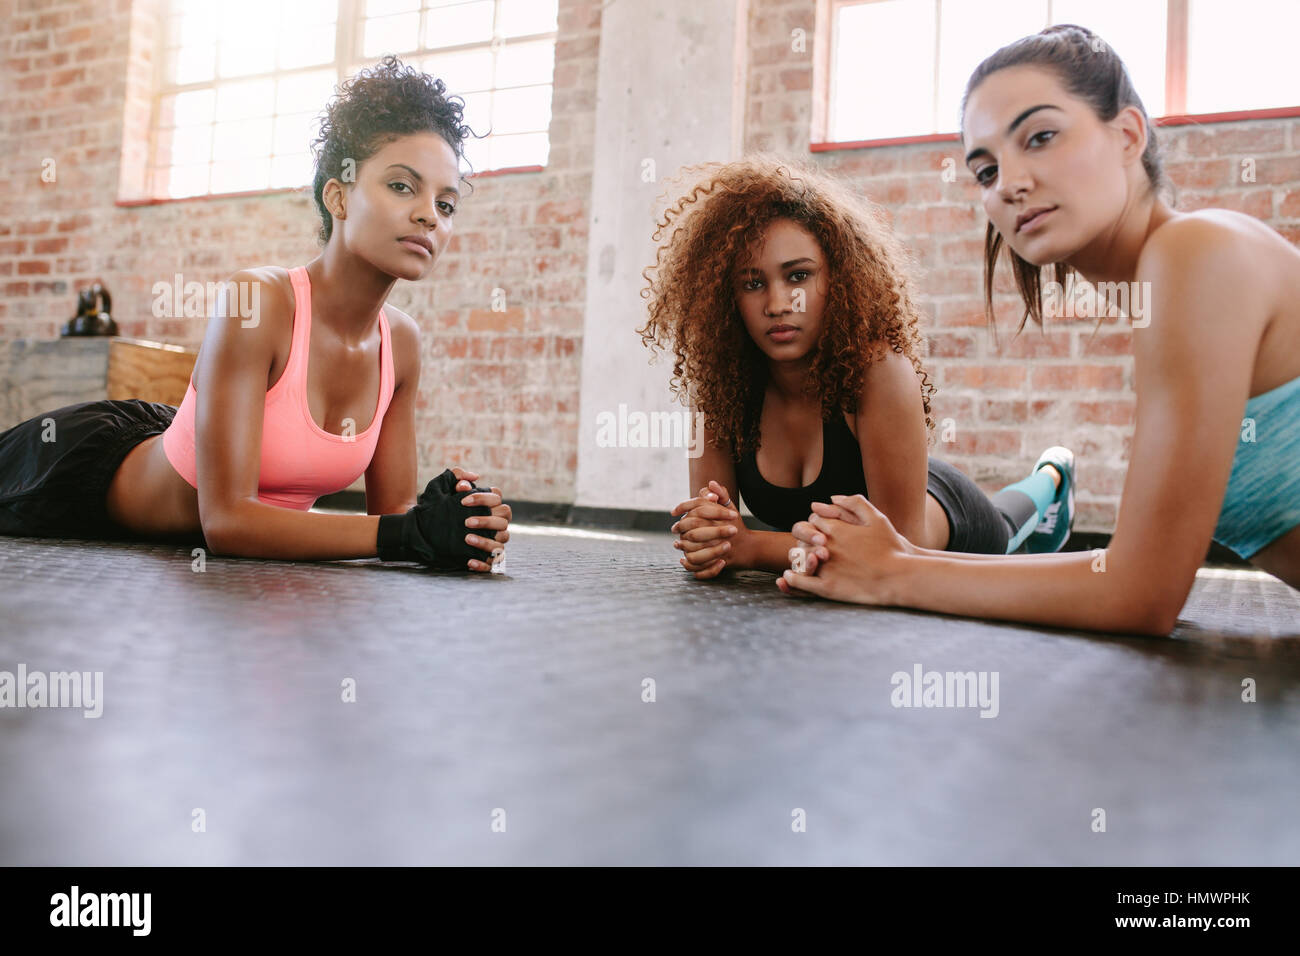 Portrait of three young women lying on gym floor and looking at camera. Females in fitness class. Stock Photo